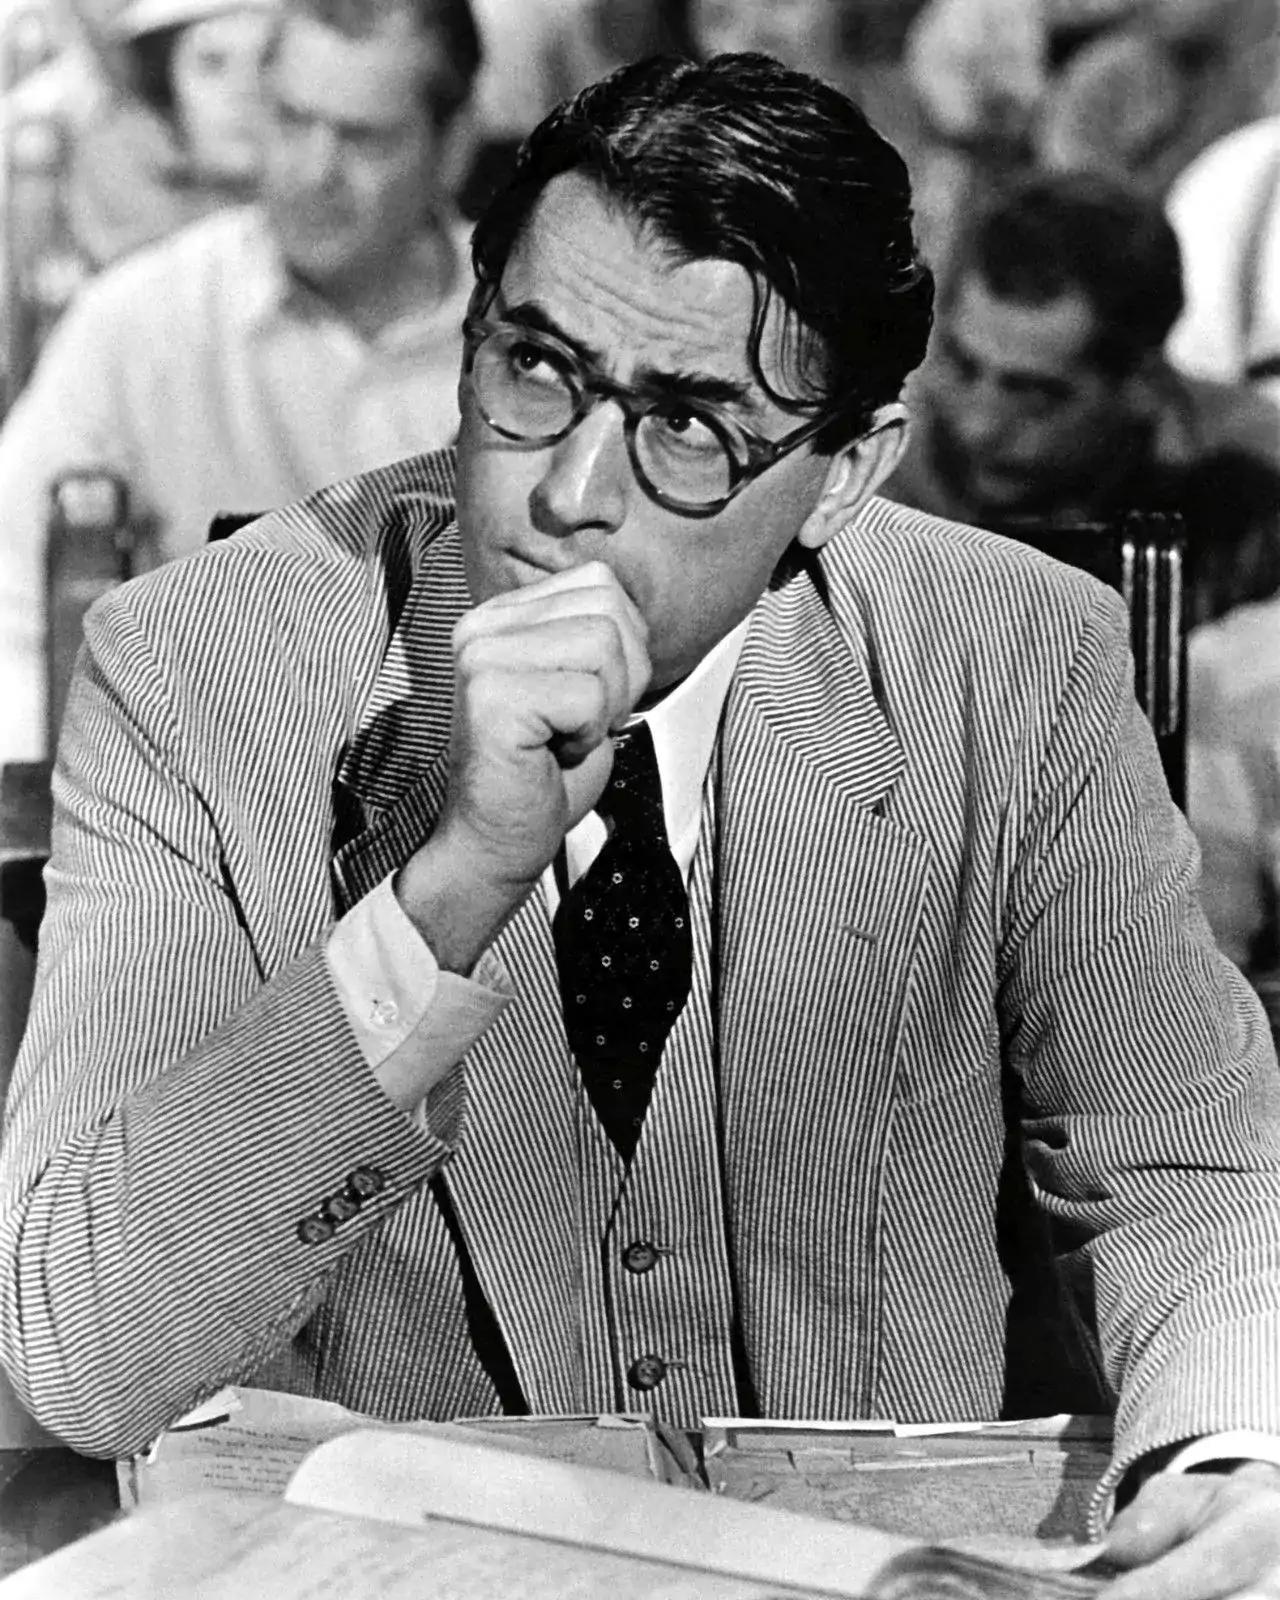 Atticus Finch (Gregory Peck) from To Kill a Mockingbird